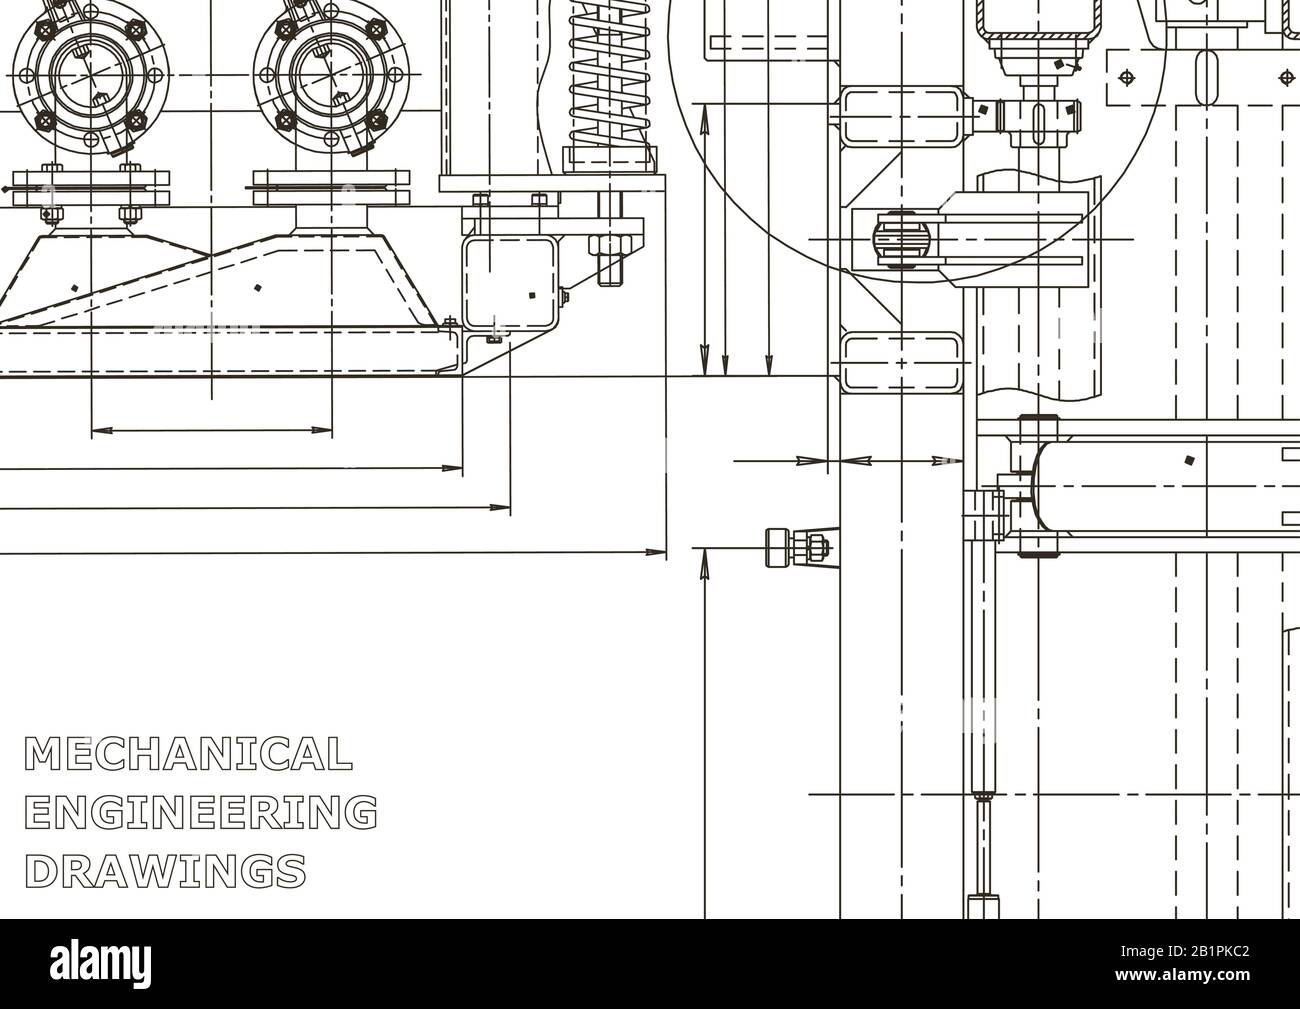 Mechanical engineering drawing. Machine-building industry.  Instrument-making drawings. Computer aided design systems. Technical  illustrations, backgrounds. Blueprint, diagram, plan